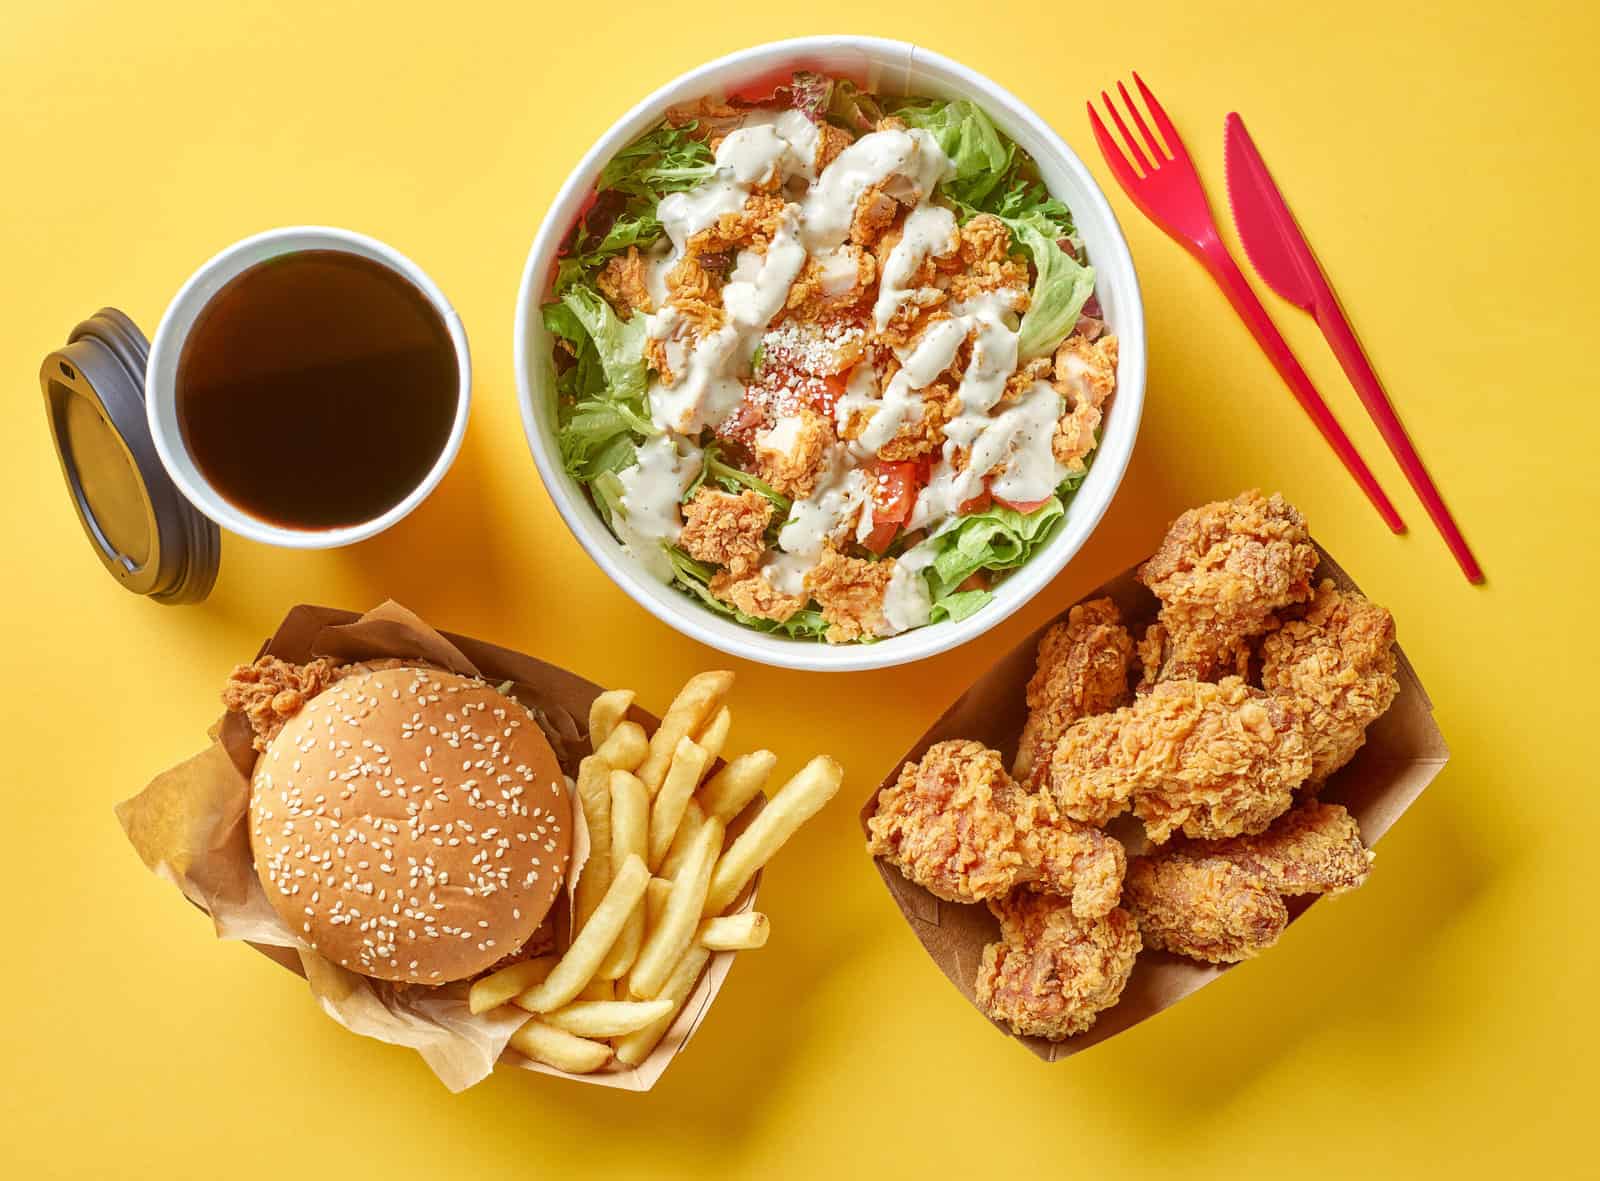 Fast Food: 25 Risks and Benefits